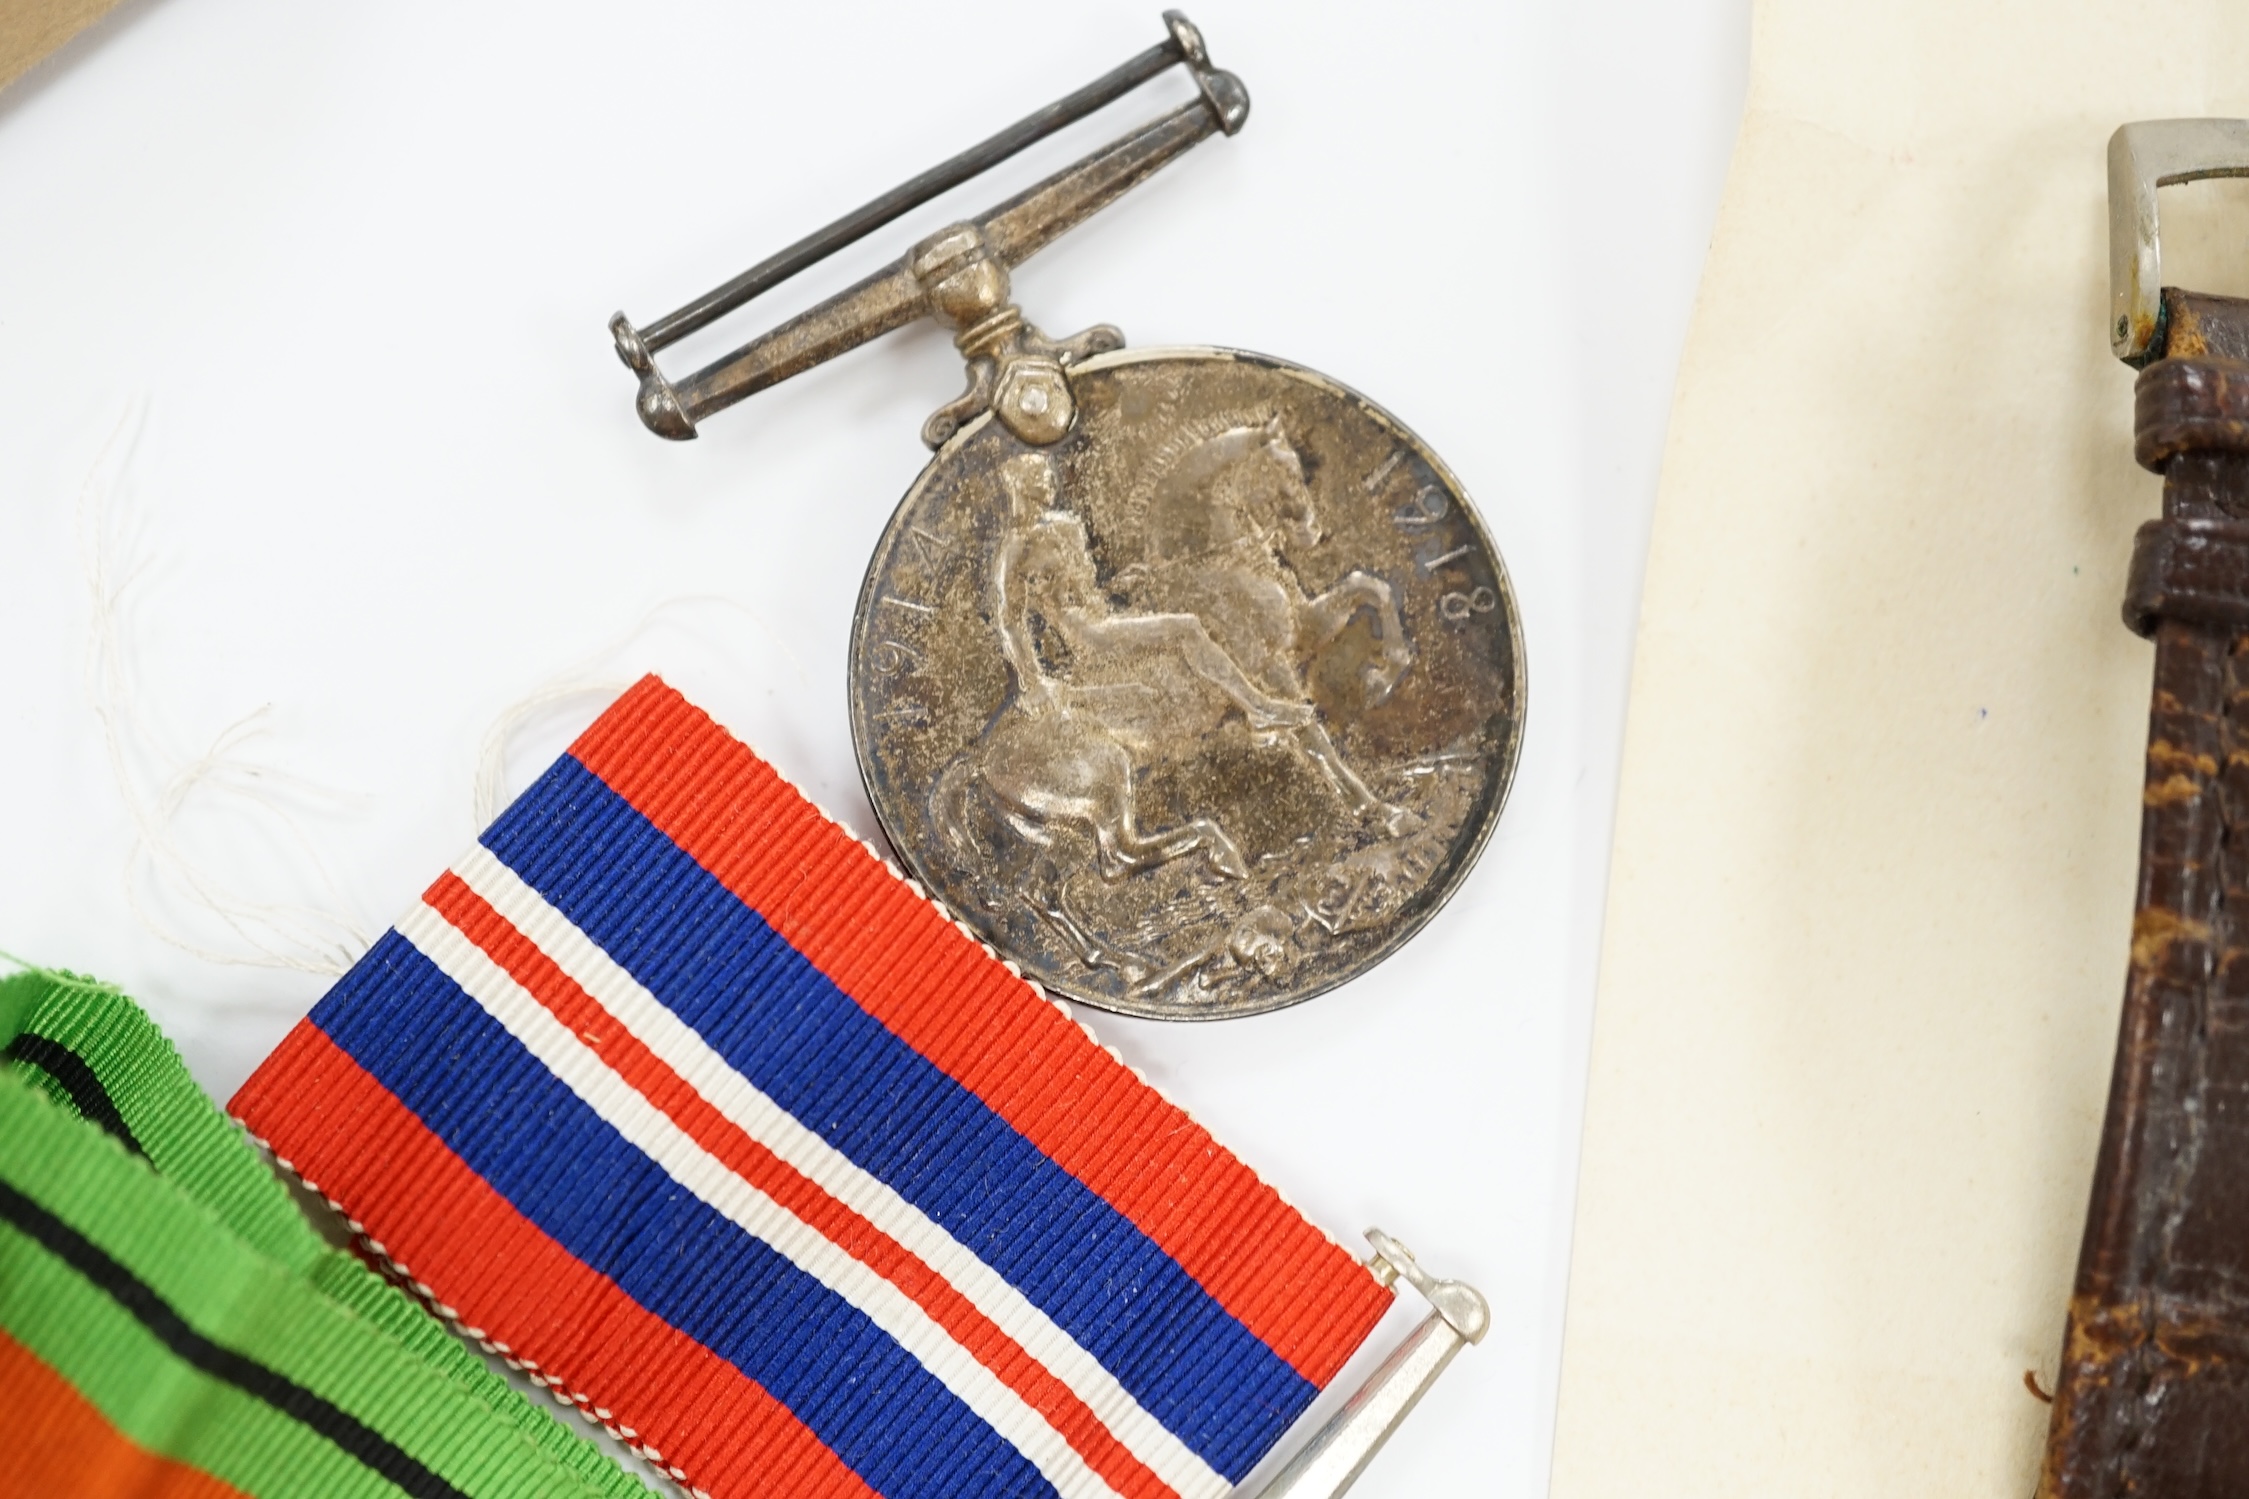 A WWII medal group awarded to Signalman H.H. Rogers, Royal Corps of Signals, comprising; a Pacific Star, a 1939-1945 Star, a Defence Medal and a 1939-1945 War Medal, together with the related note detailing the awards is